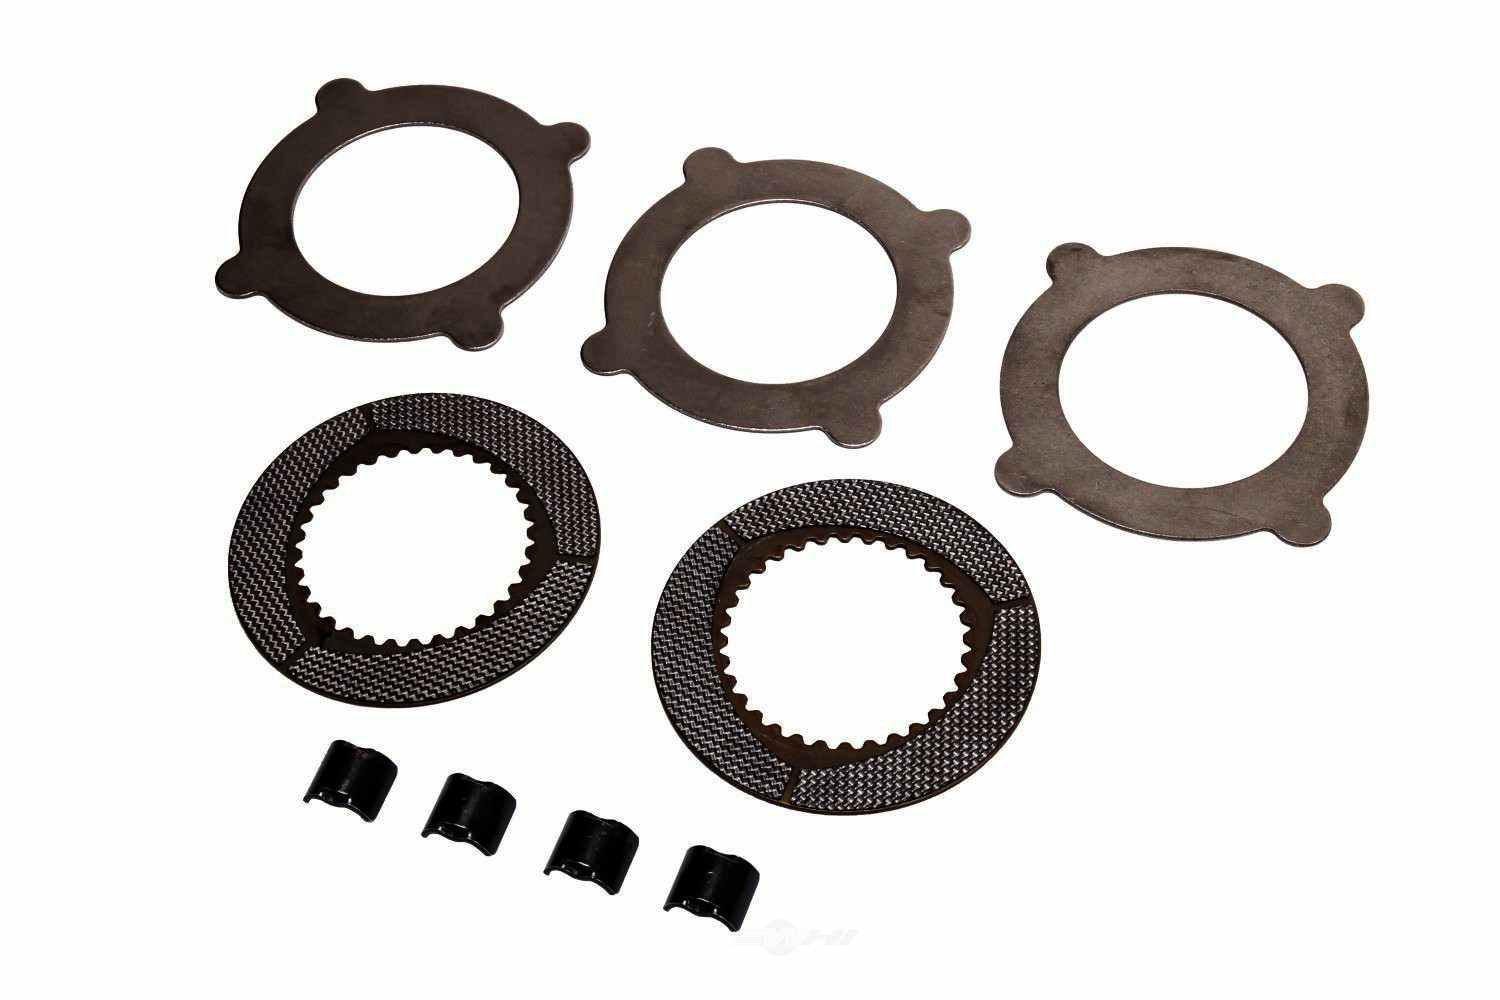 GM GENUINE PARTS - Differential Clutch Pack - GMP 12471544